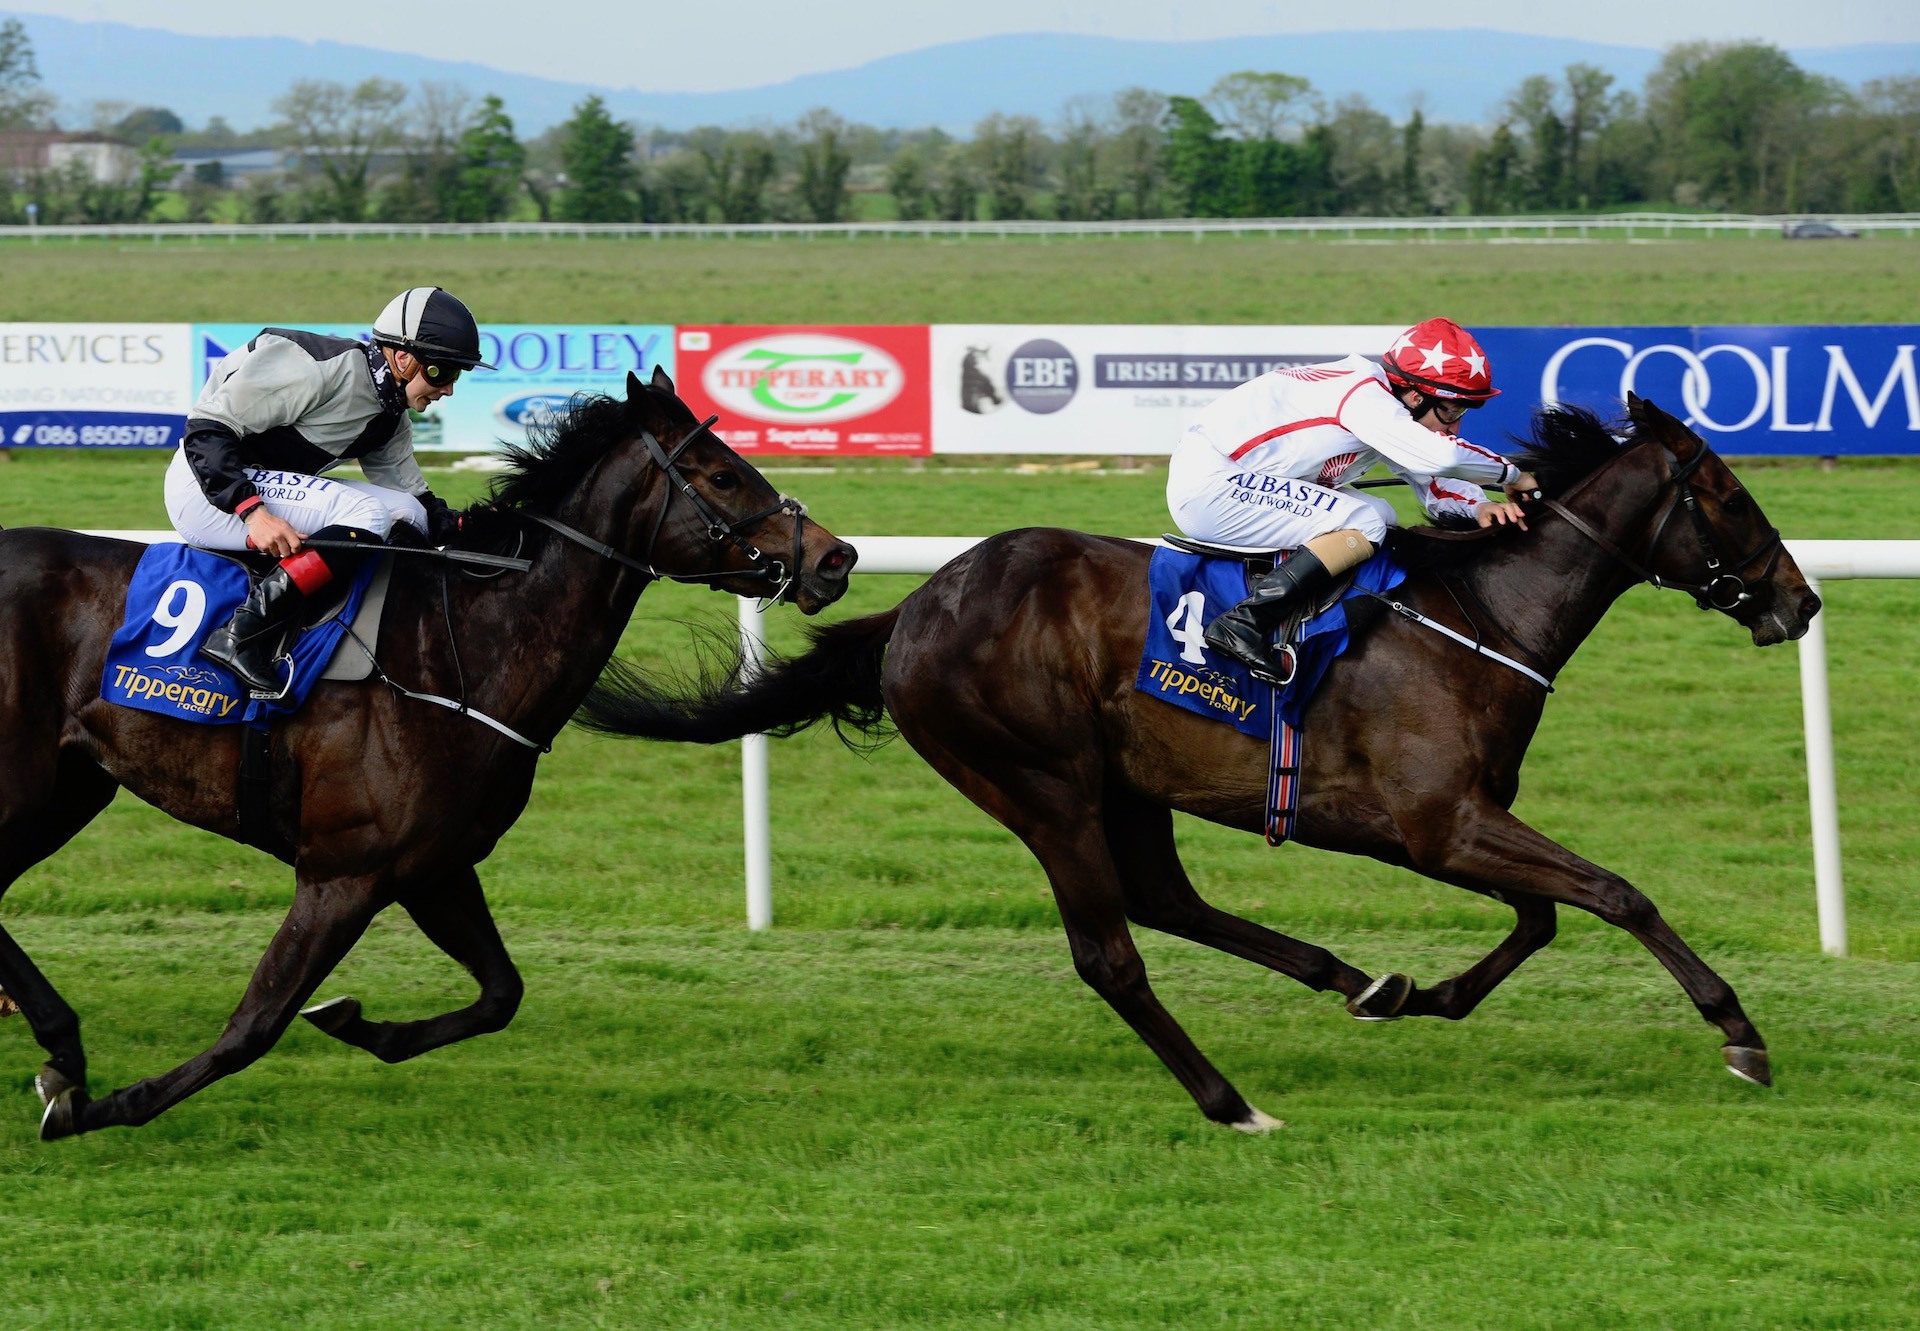 Privelege (Holy Roman Emperor) Wins His Maiden At Tipperary